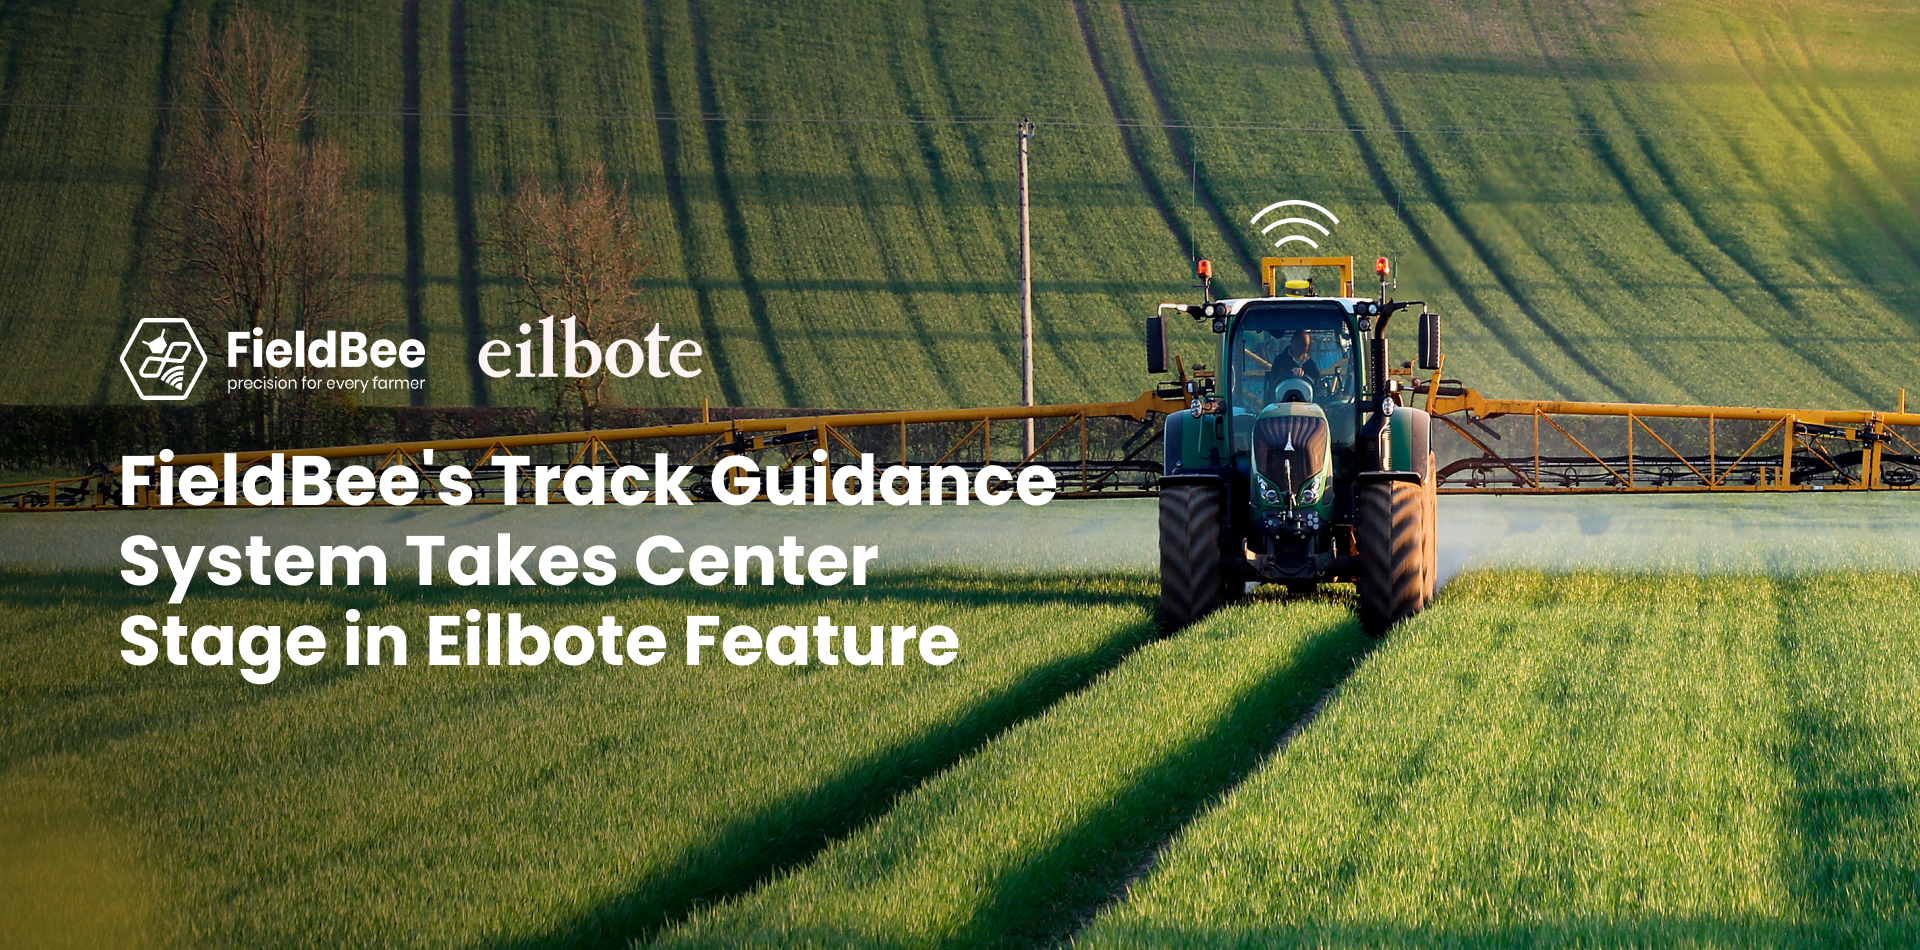 FieldBee's Track Guidance System Takes Center Stage in Eilbote Feature